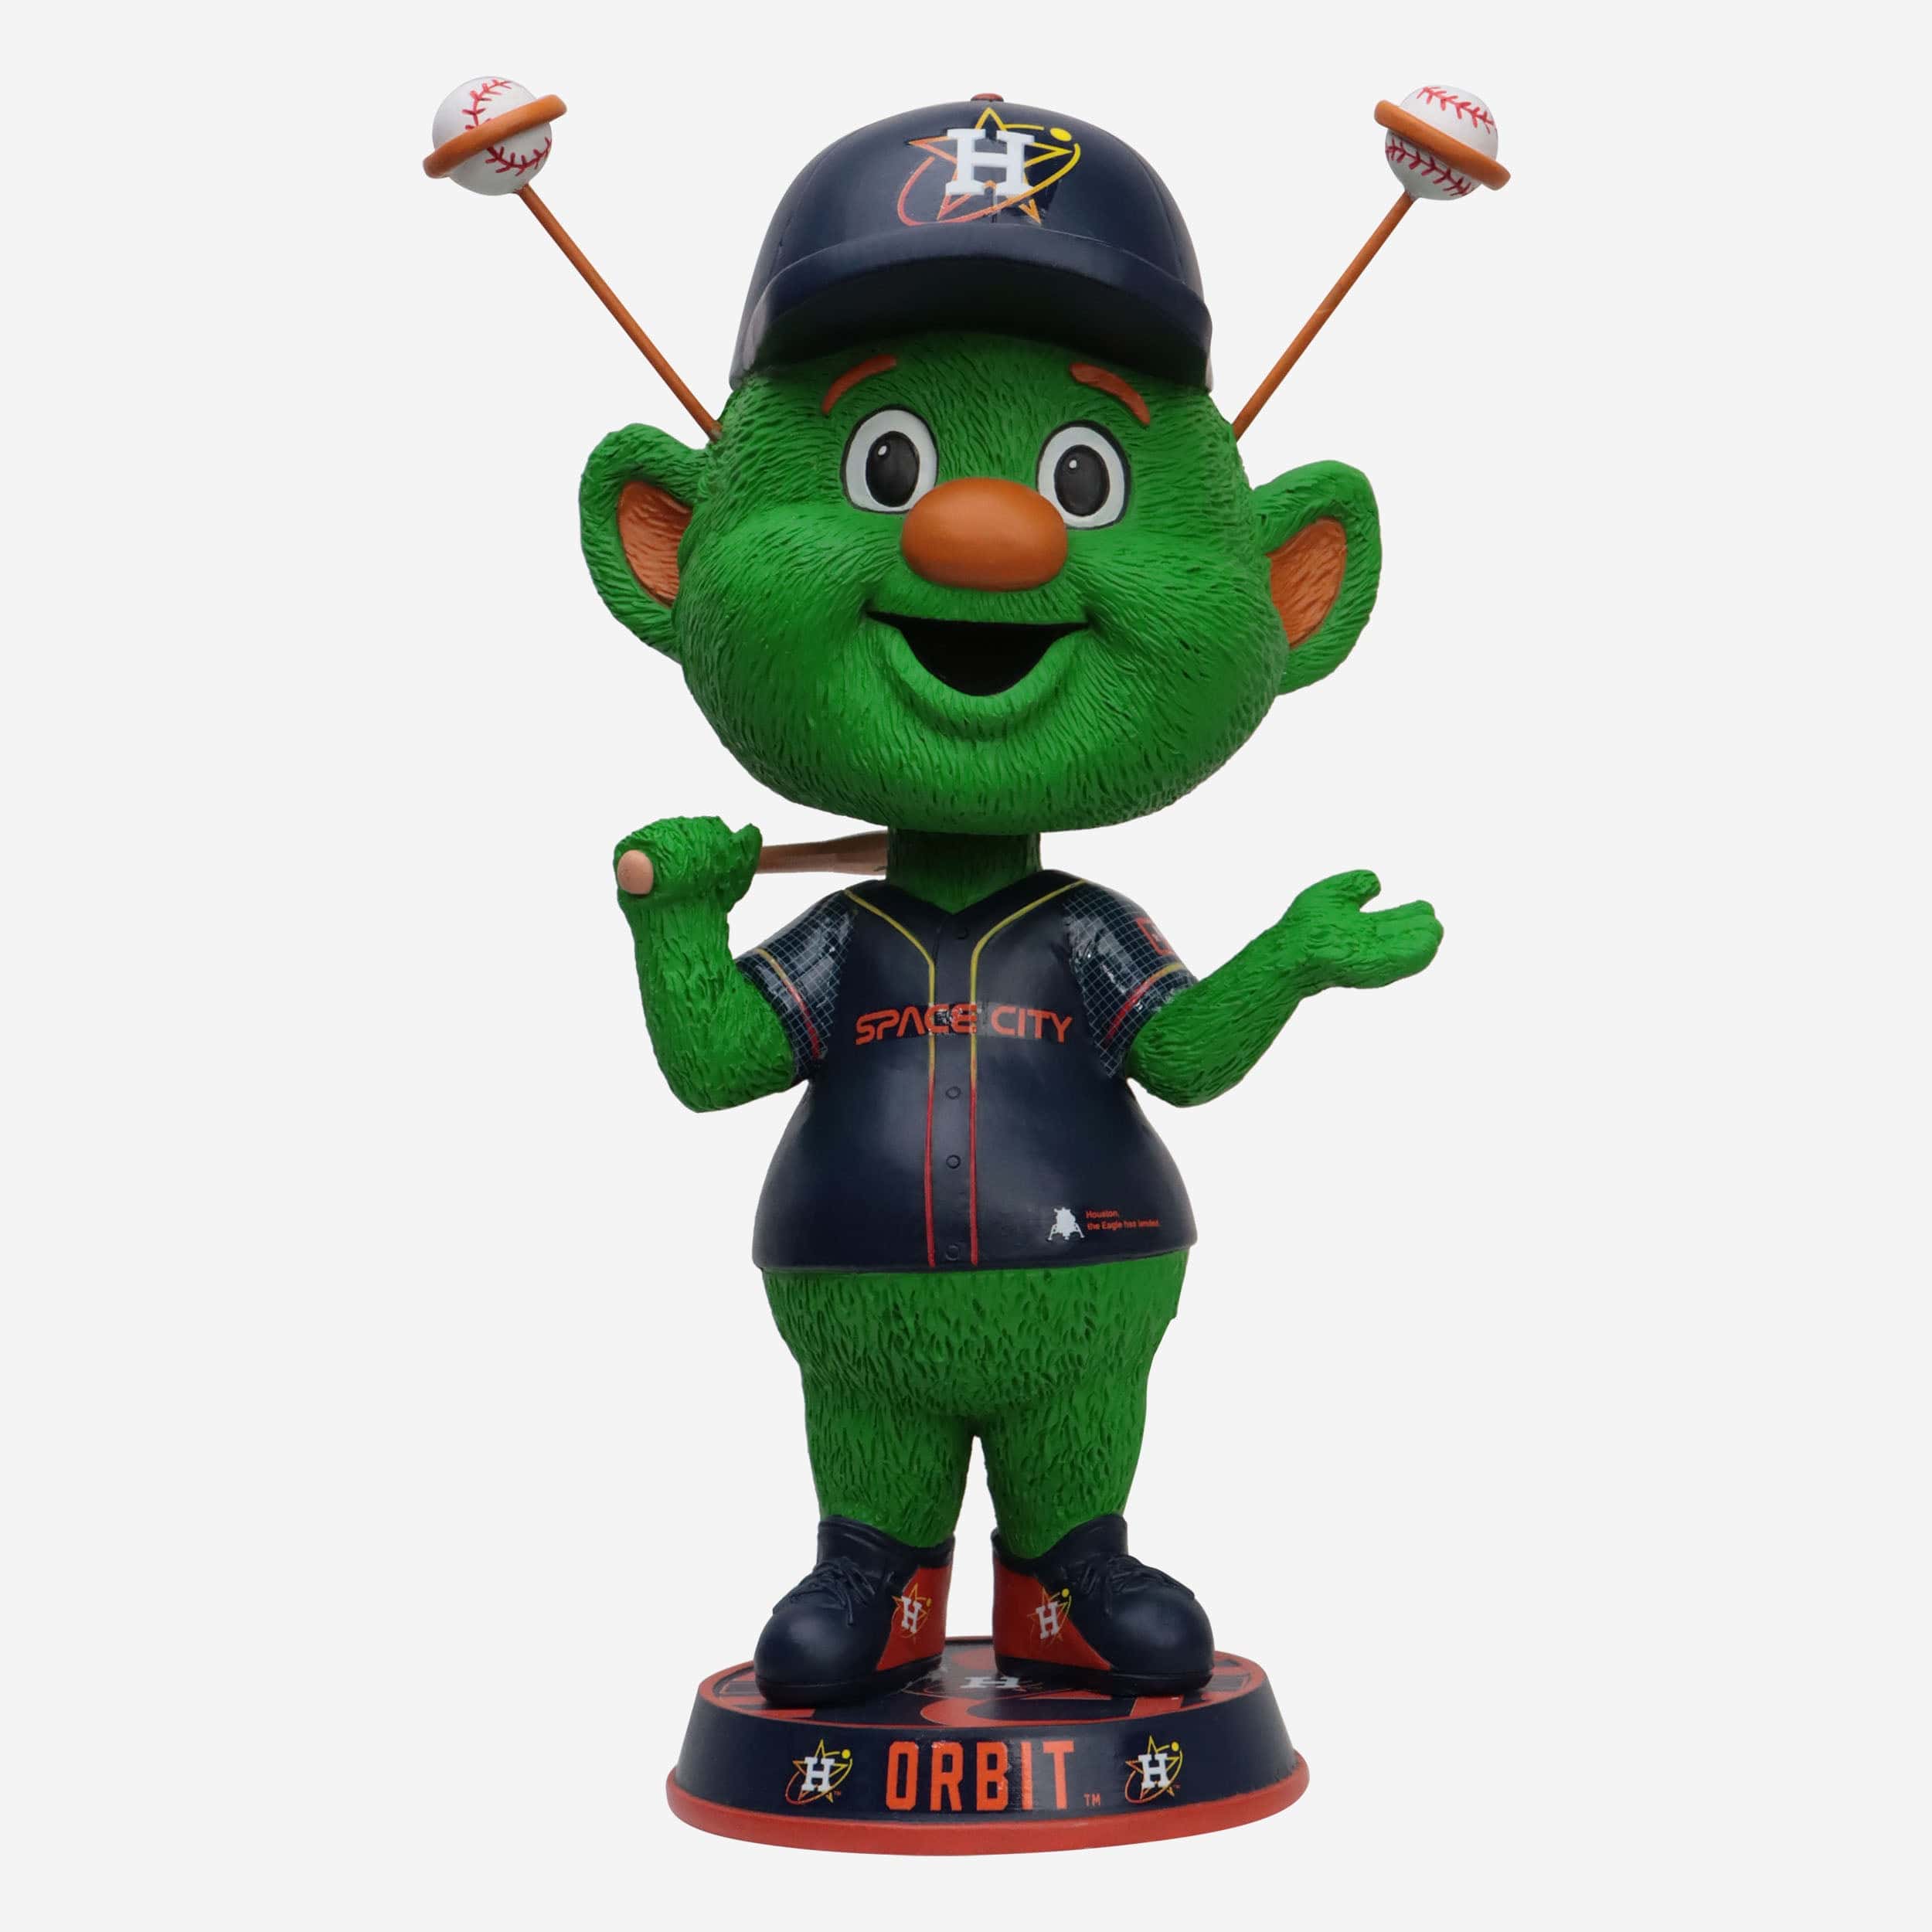 Astros holiday cards: How you can pose with Orbit!